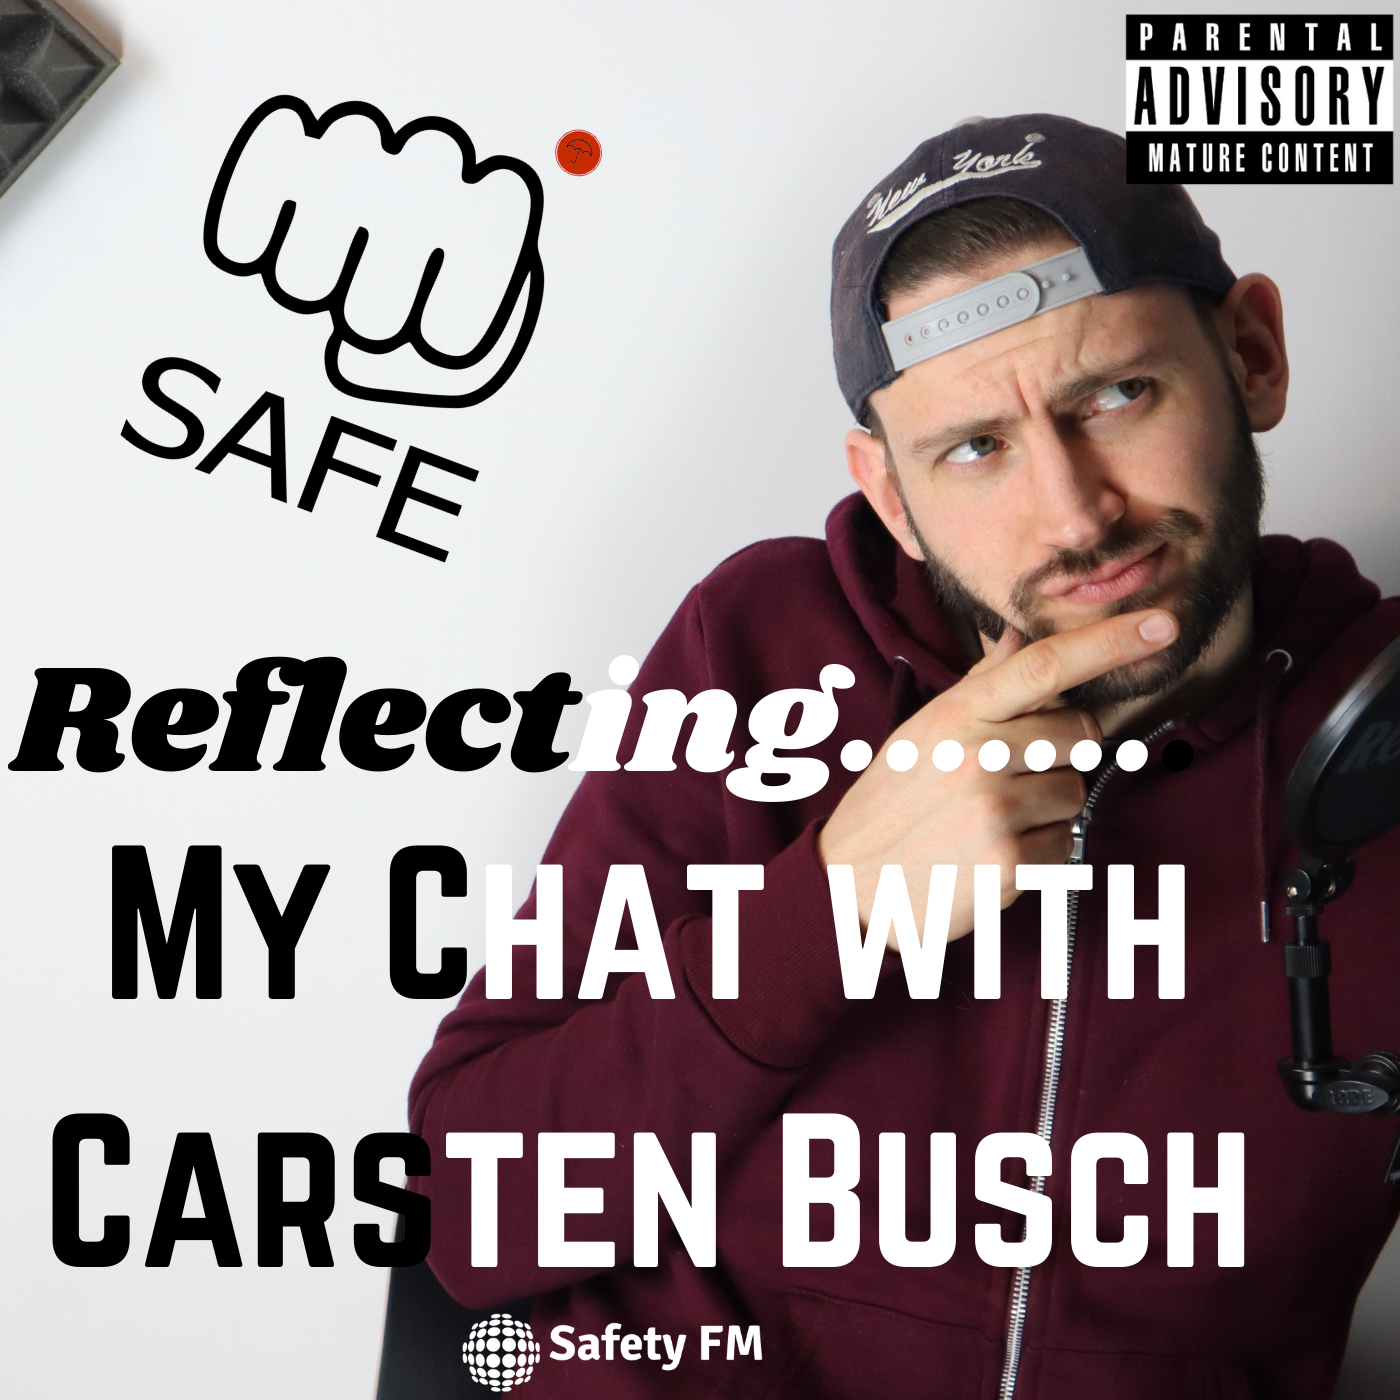 Reflecting on my chat with Carsten Busch